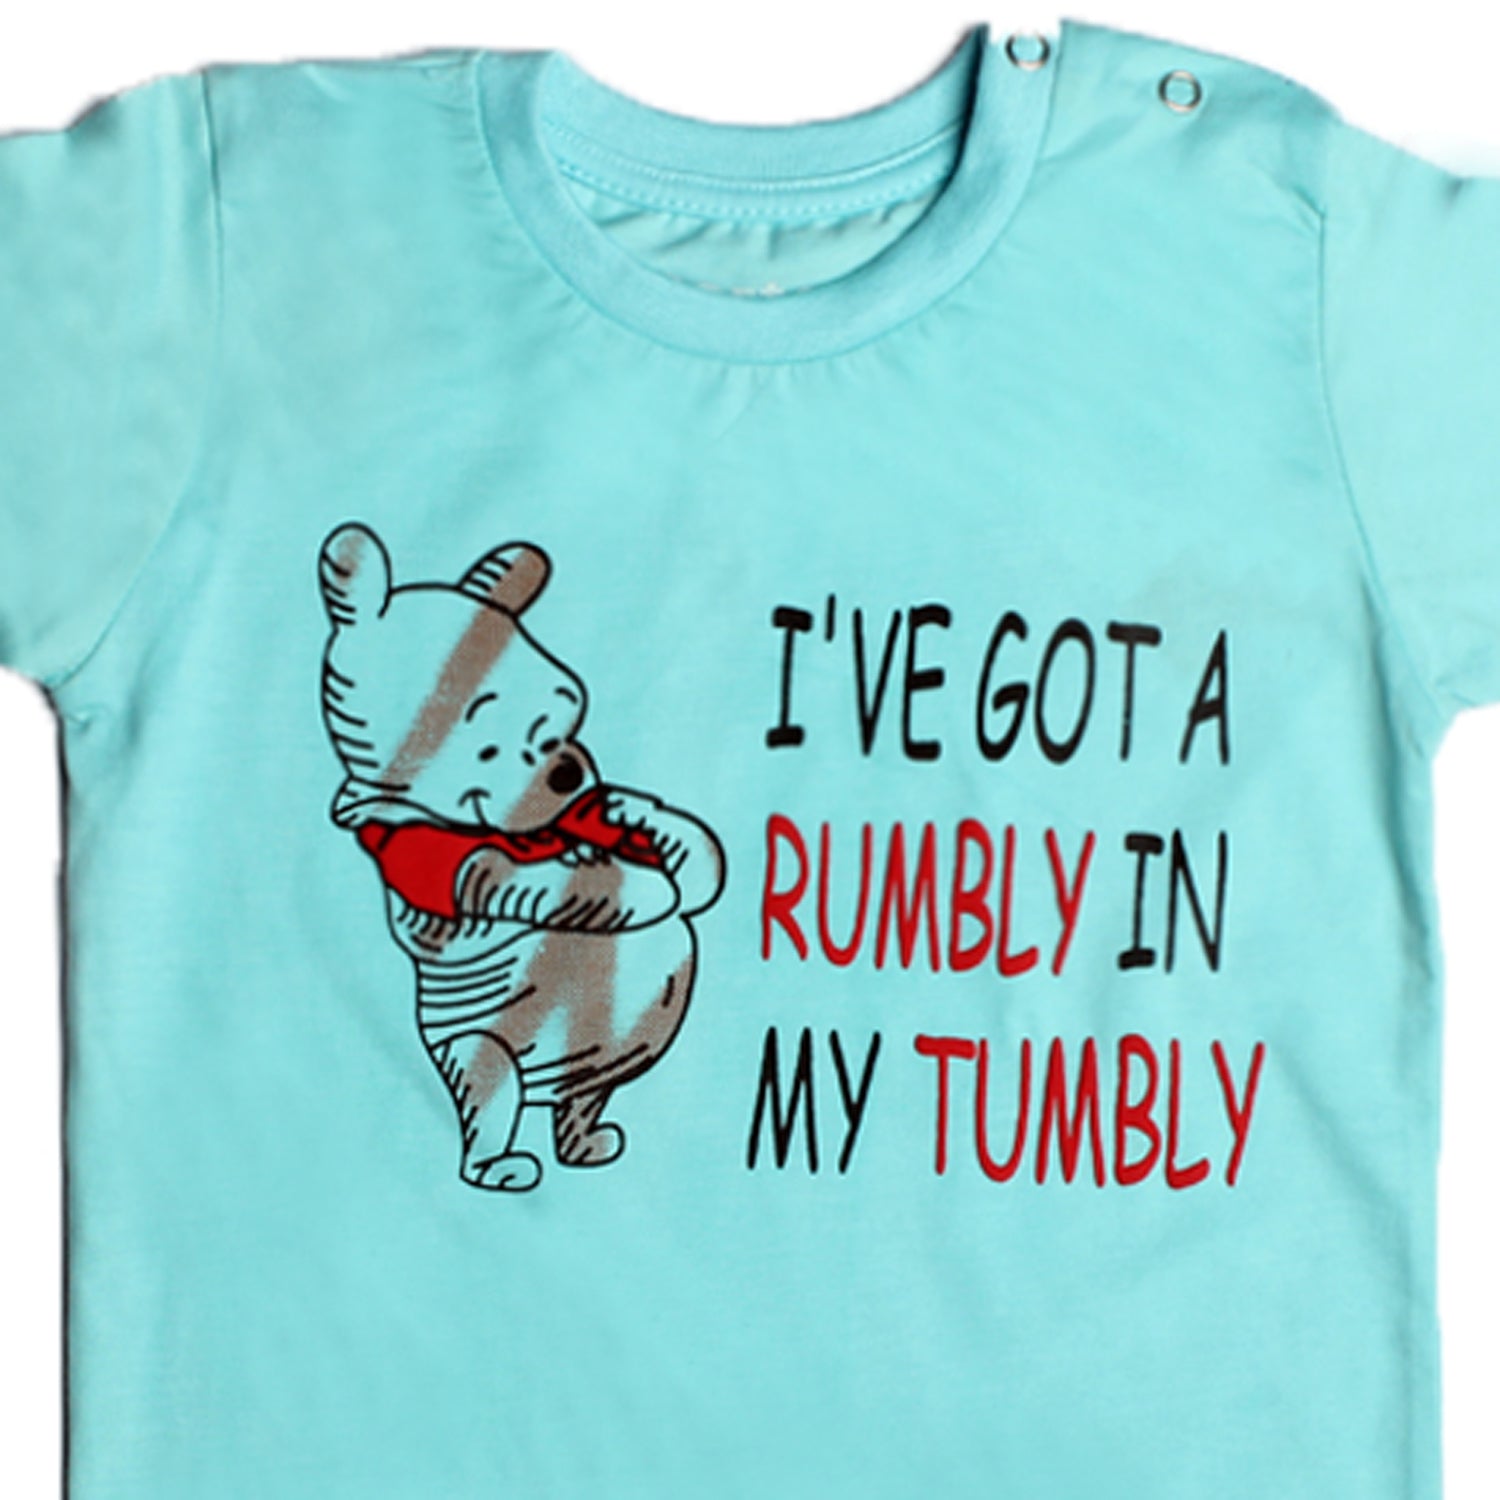 NEW SKY BLUE I'VE GOT A RUMBLY IN A MY TUMBLY PRINTED HALF SLEEVES T-SHIRT